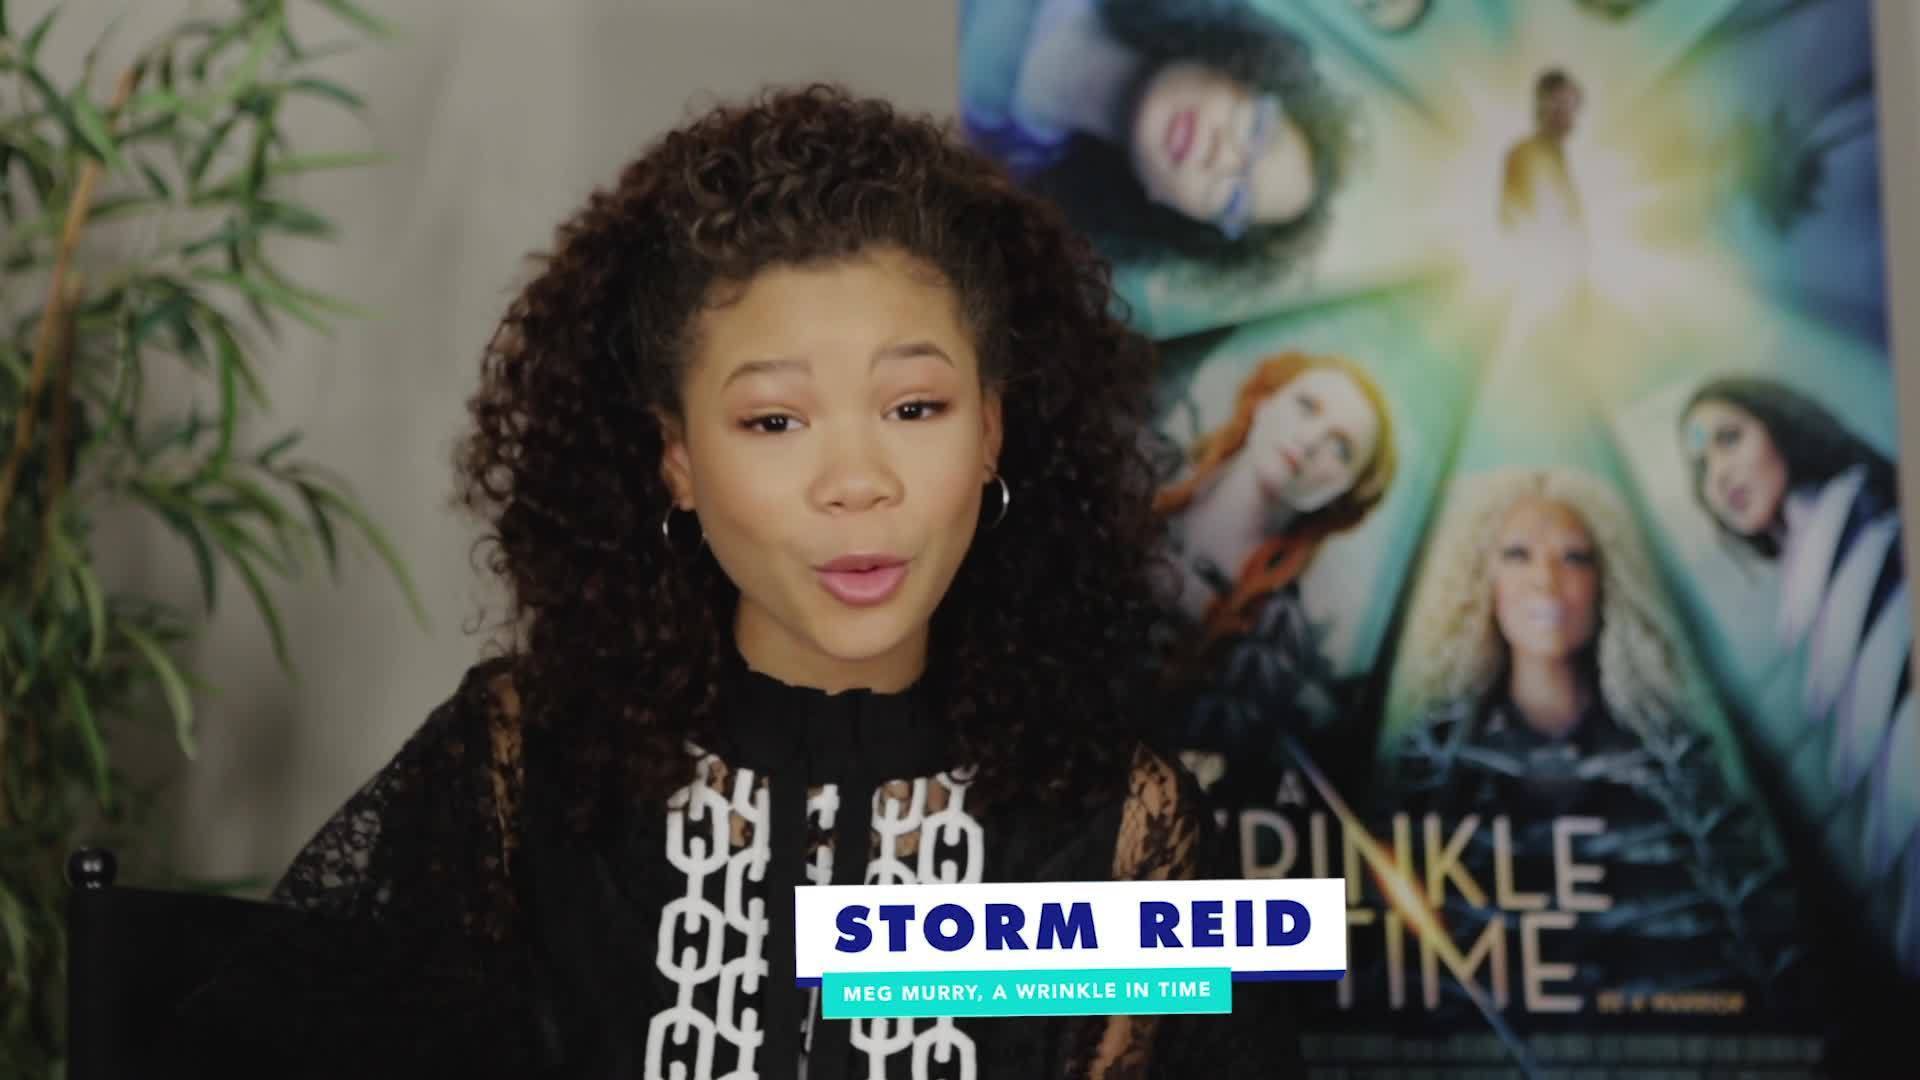 Storm Reid From A Wrinkle in Time Takes the "Which Disney Heroine Are You?" Quiz | Oh My Disney Show